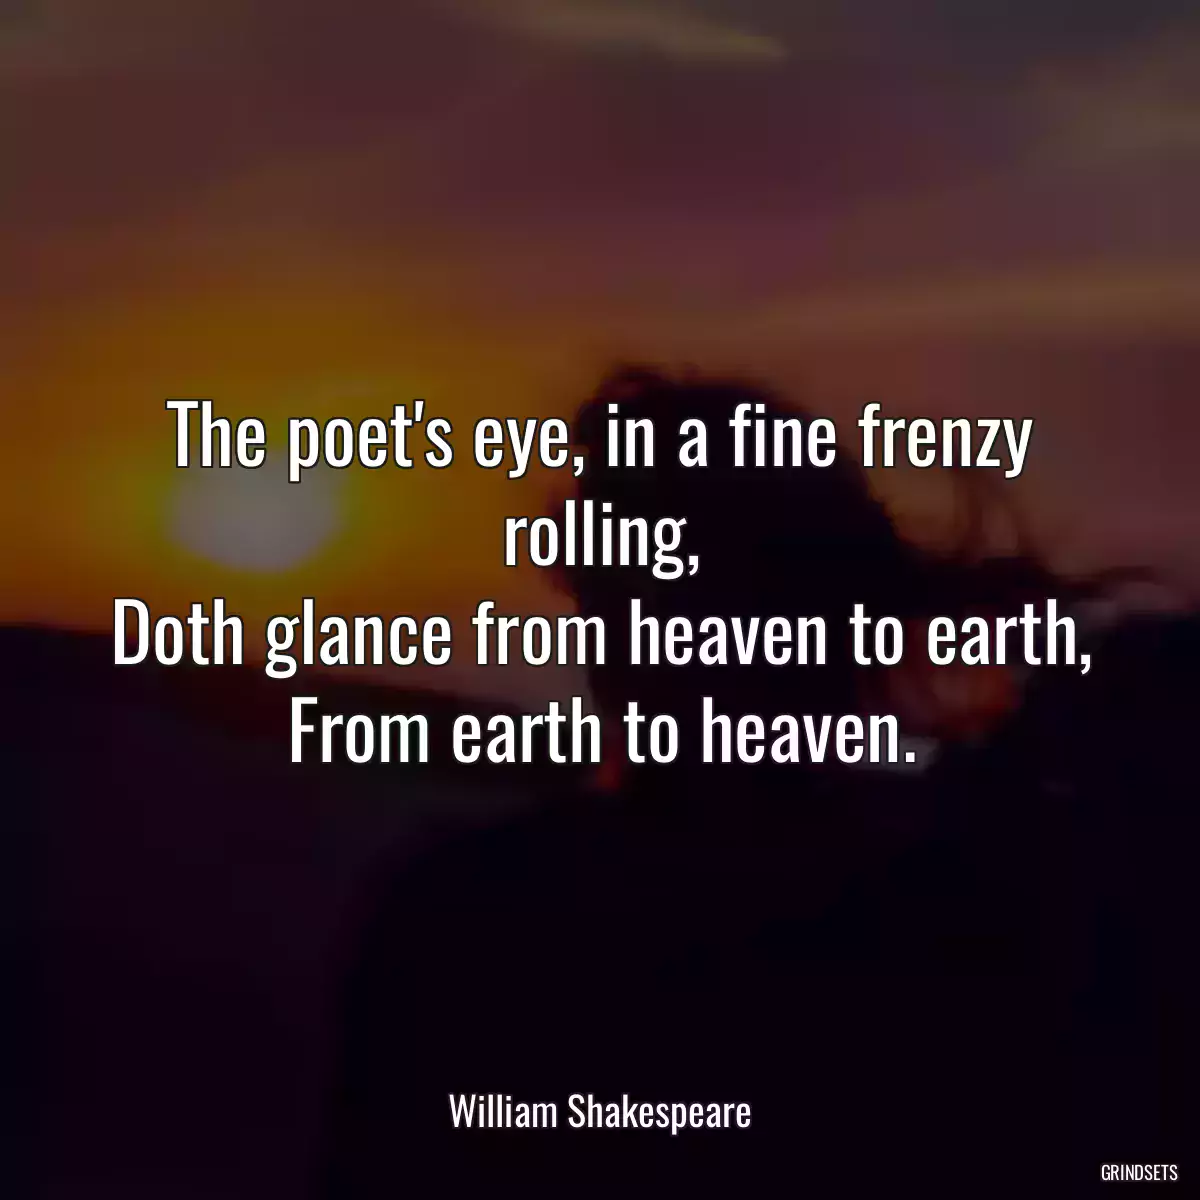 The poet\'s eye, in a fine frenzy rolling,
Doth glance from heaven to earth,
From earth to heaven.